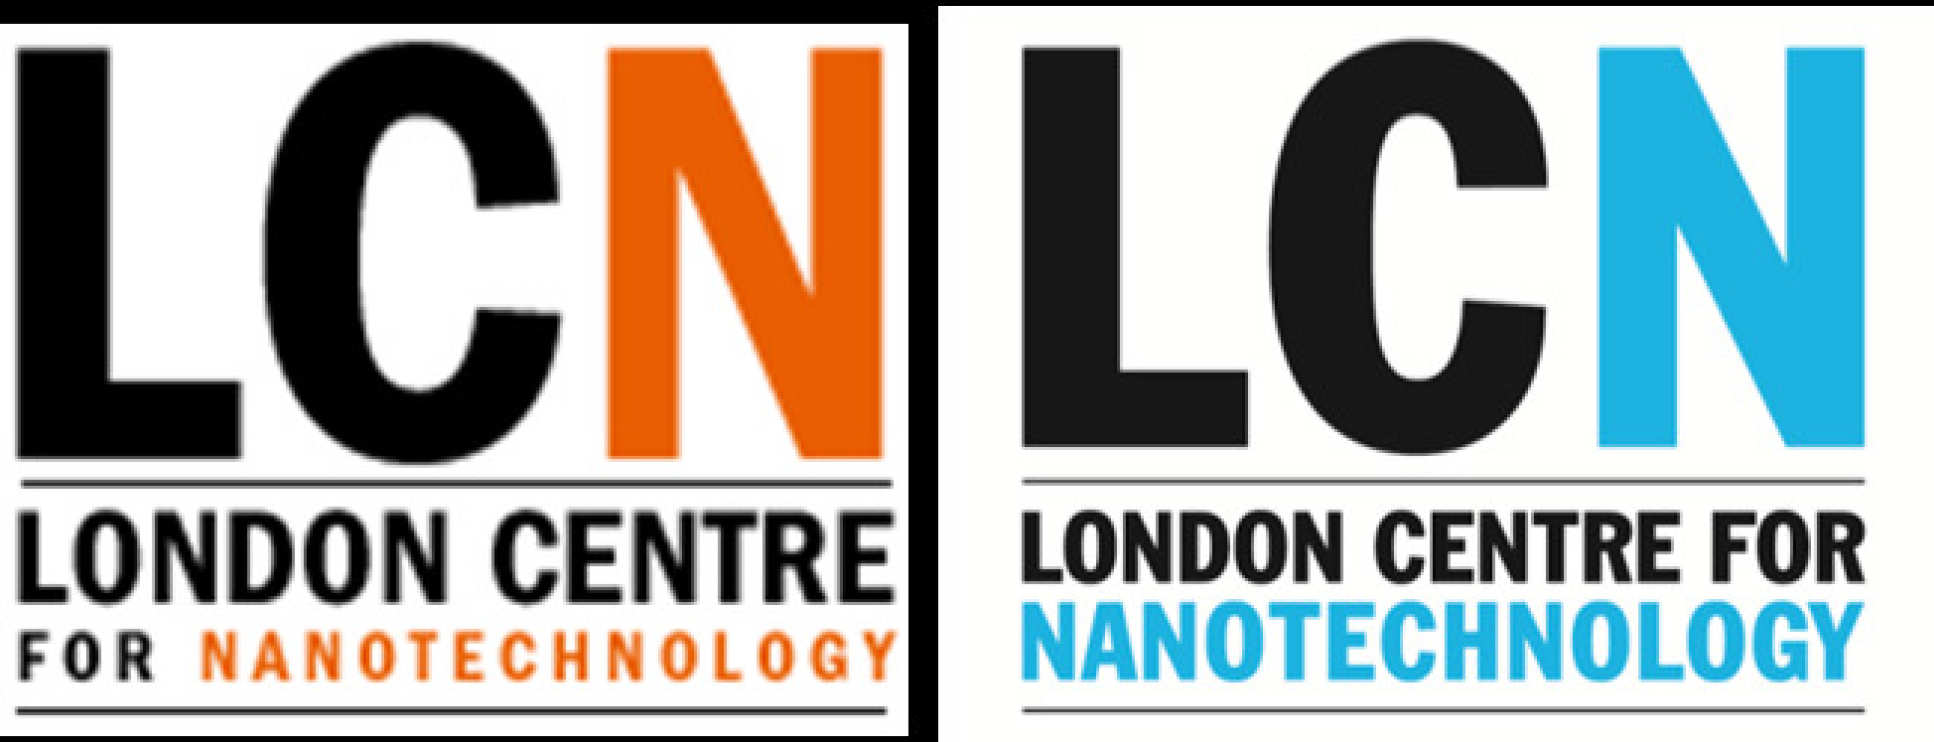 Evolution of the LCN logo, from the original design (left) to the current one (right), officially unveiled in 2011. Notice the change in colour and word distribution in the bottom banner.